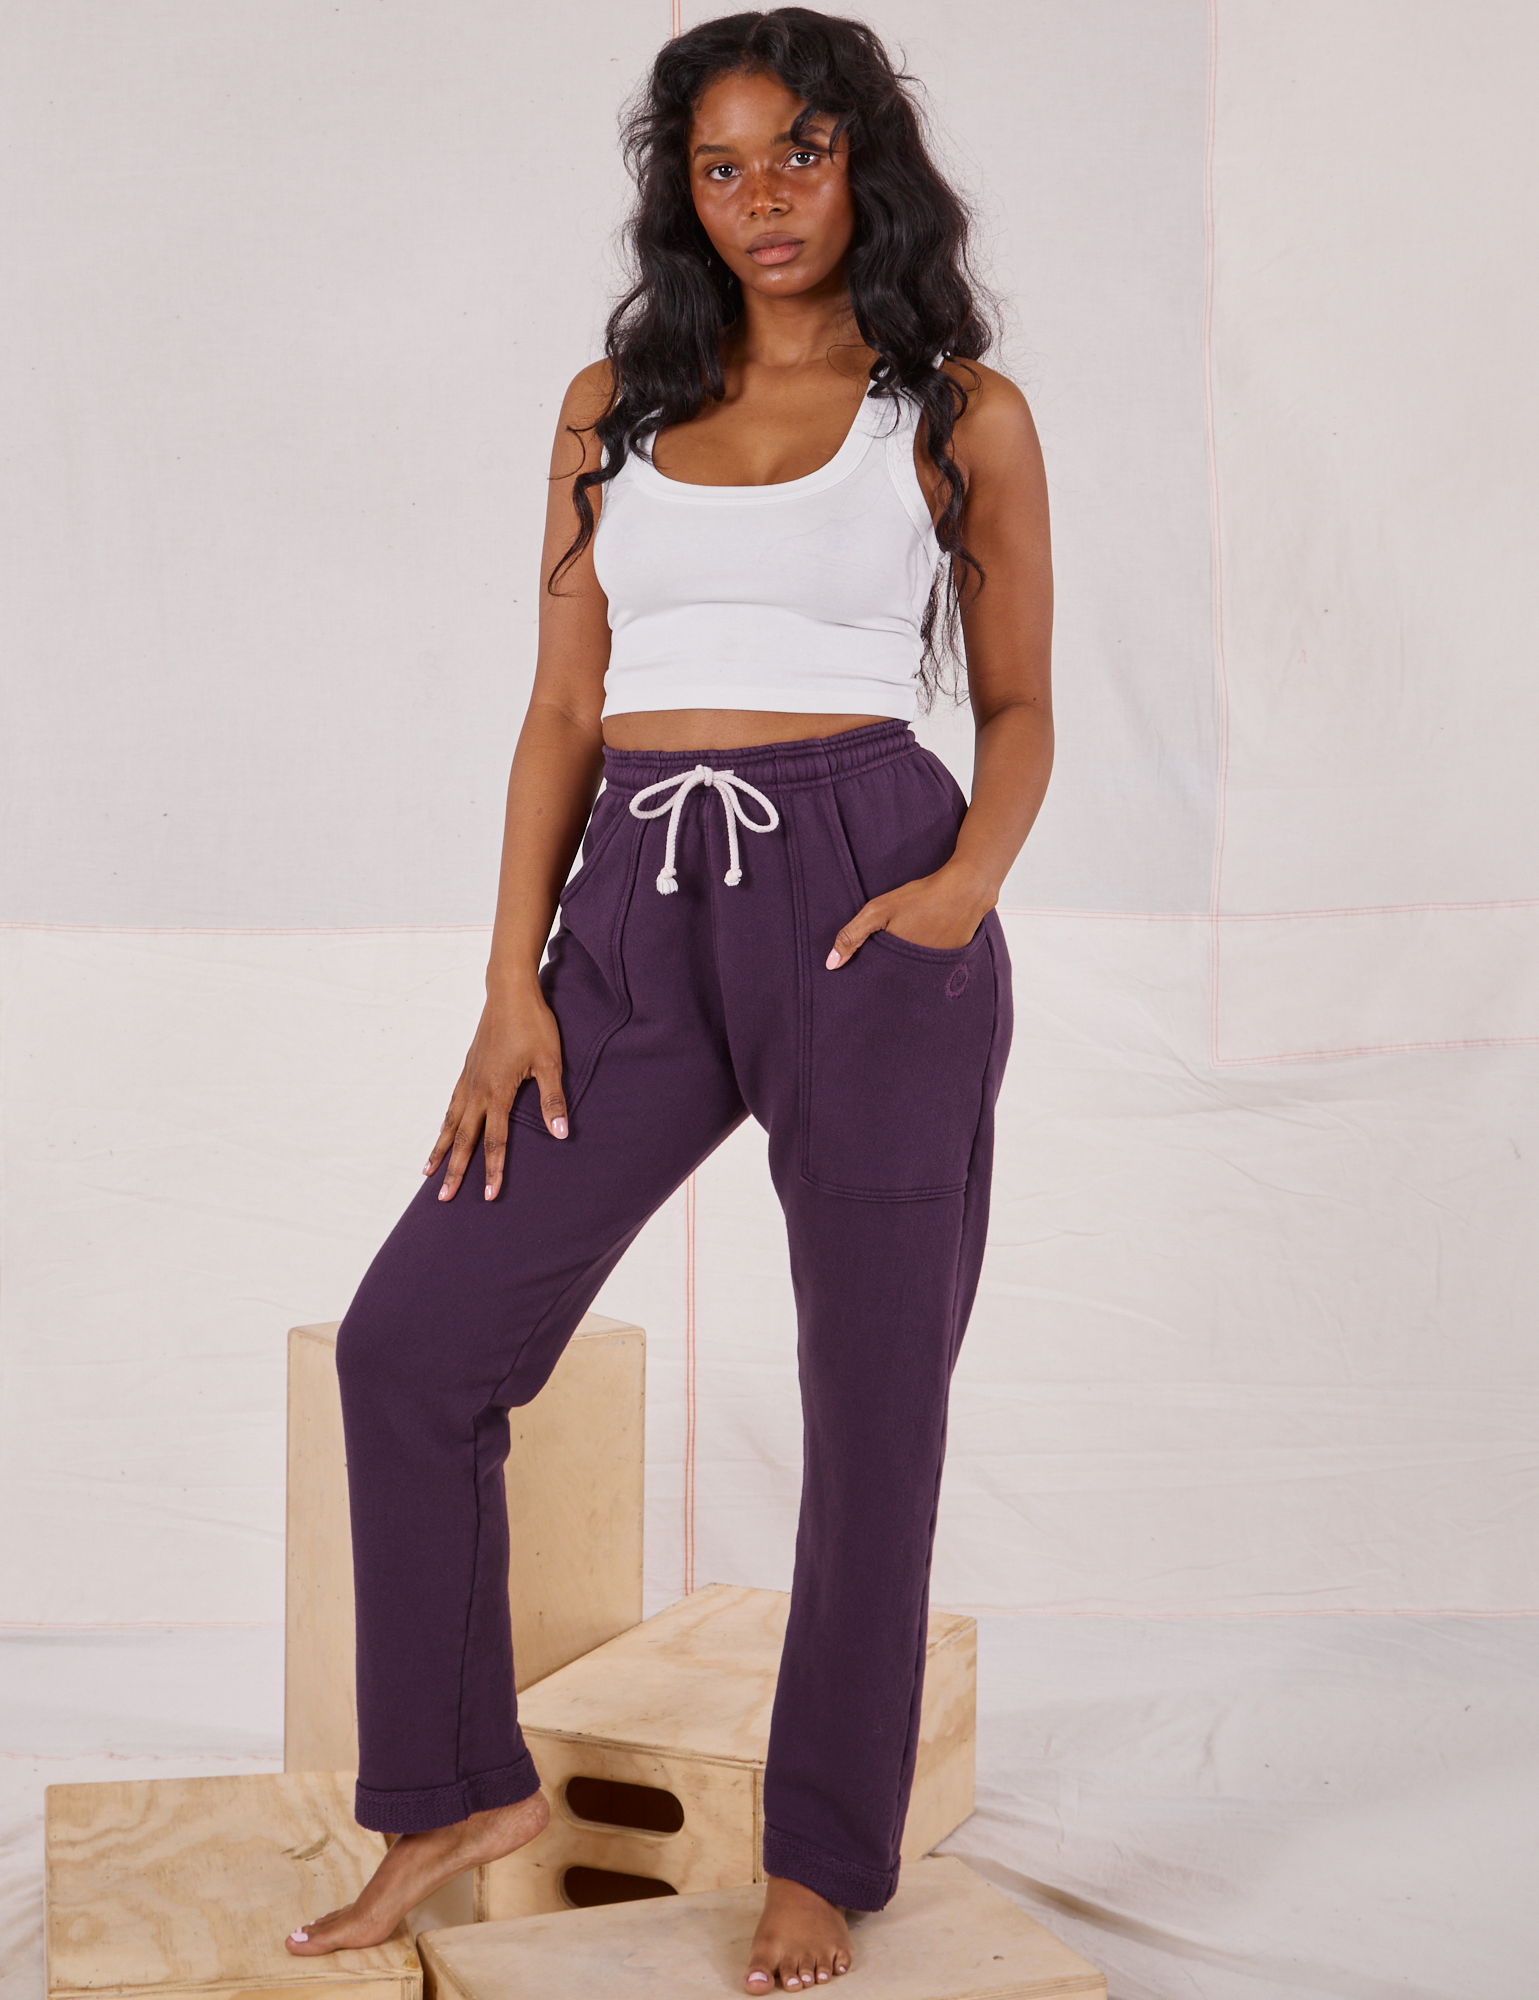 Kandia is wearing Rolled Cuff Sweat Pants in Nebula Purple and a Cropped Tank in vintage tee off-white 